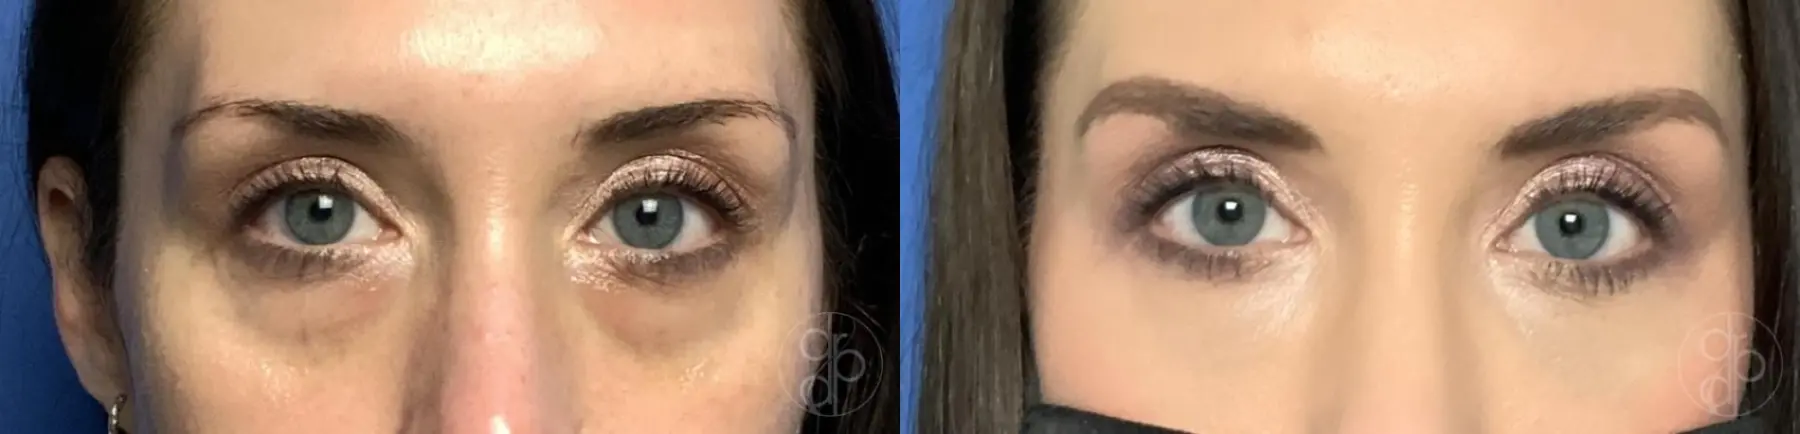 patient 12747 fillers before and after result - Before and After 1